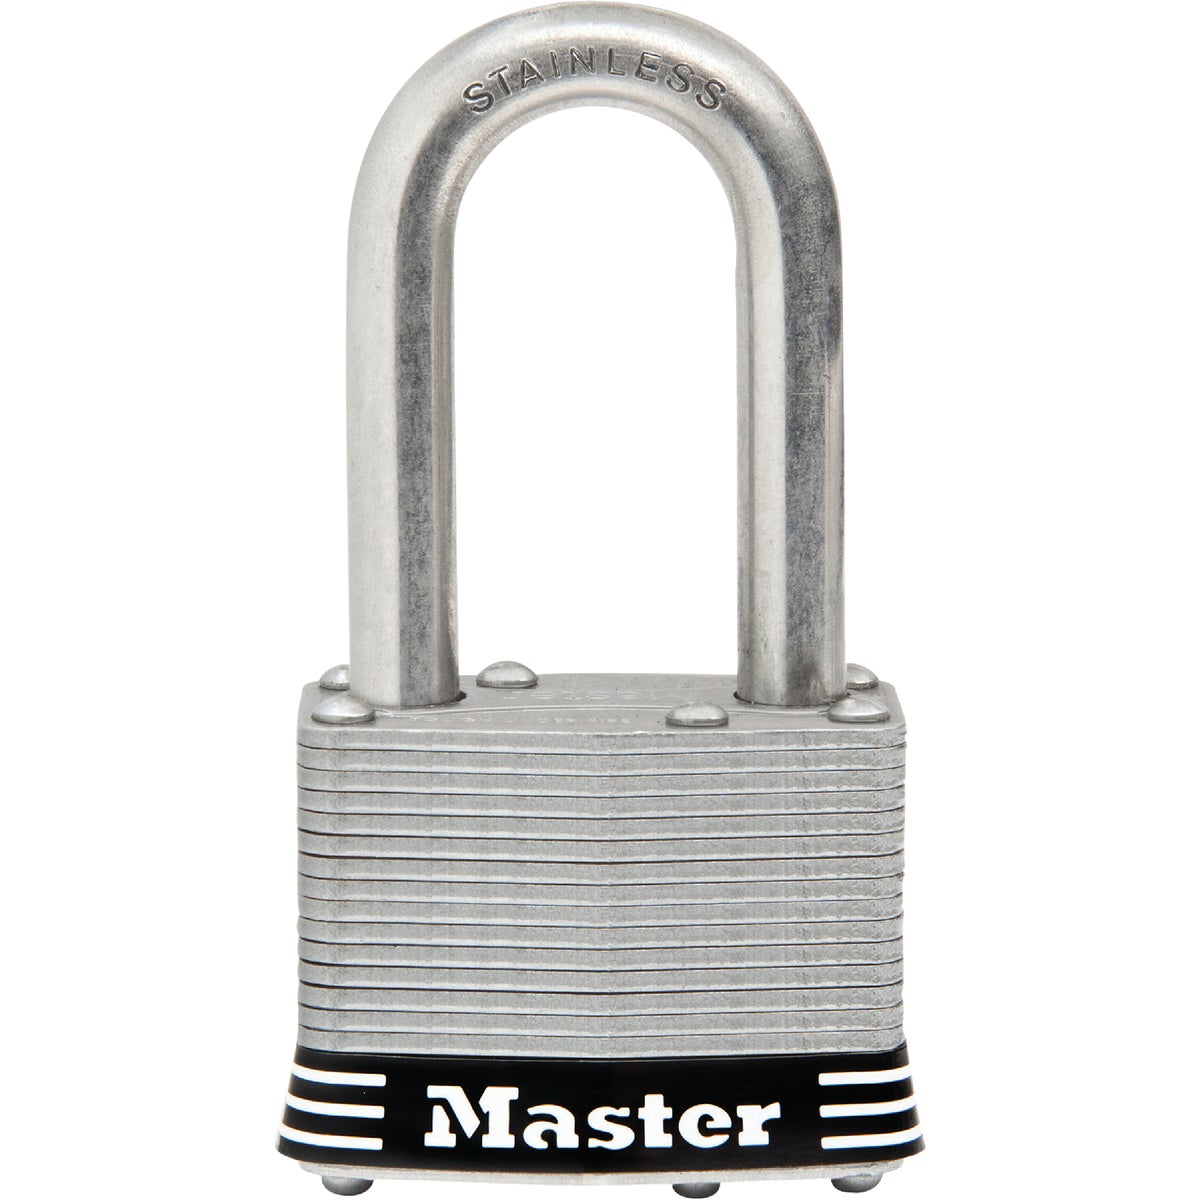 Master Lock 1-3/4 In. Laminated Stainless Steel Keyed Padlock with 1-1/2 In. Shackle